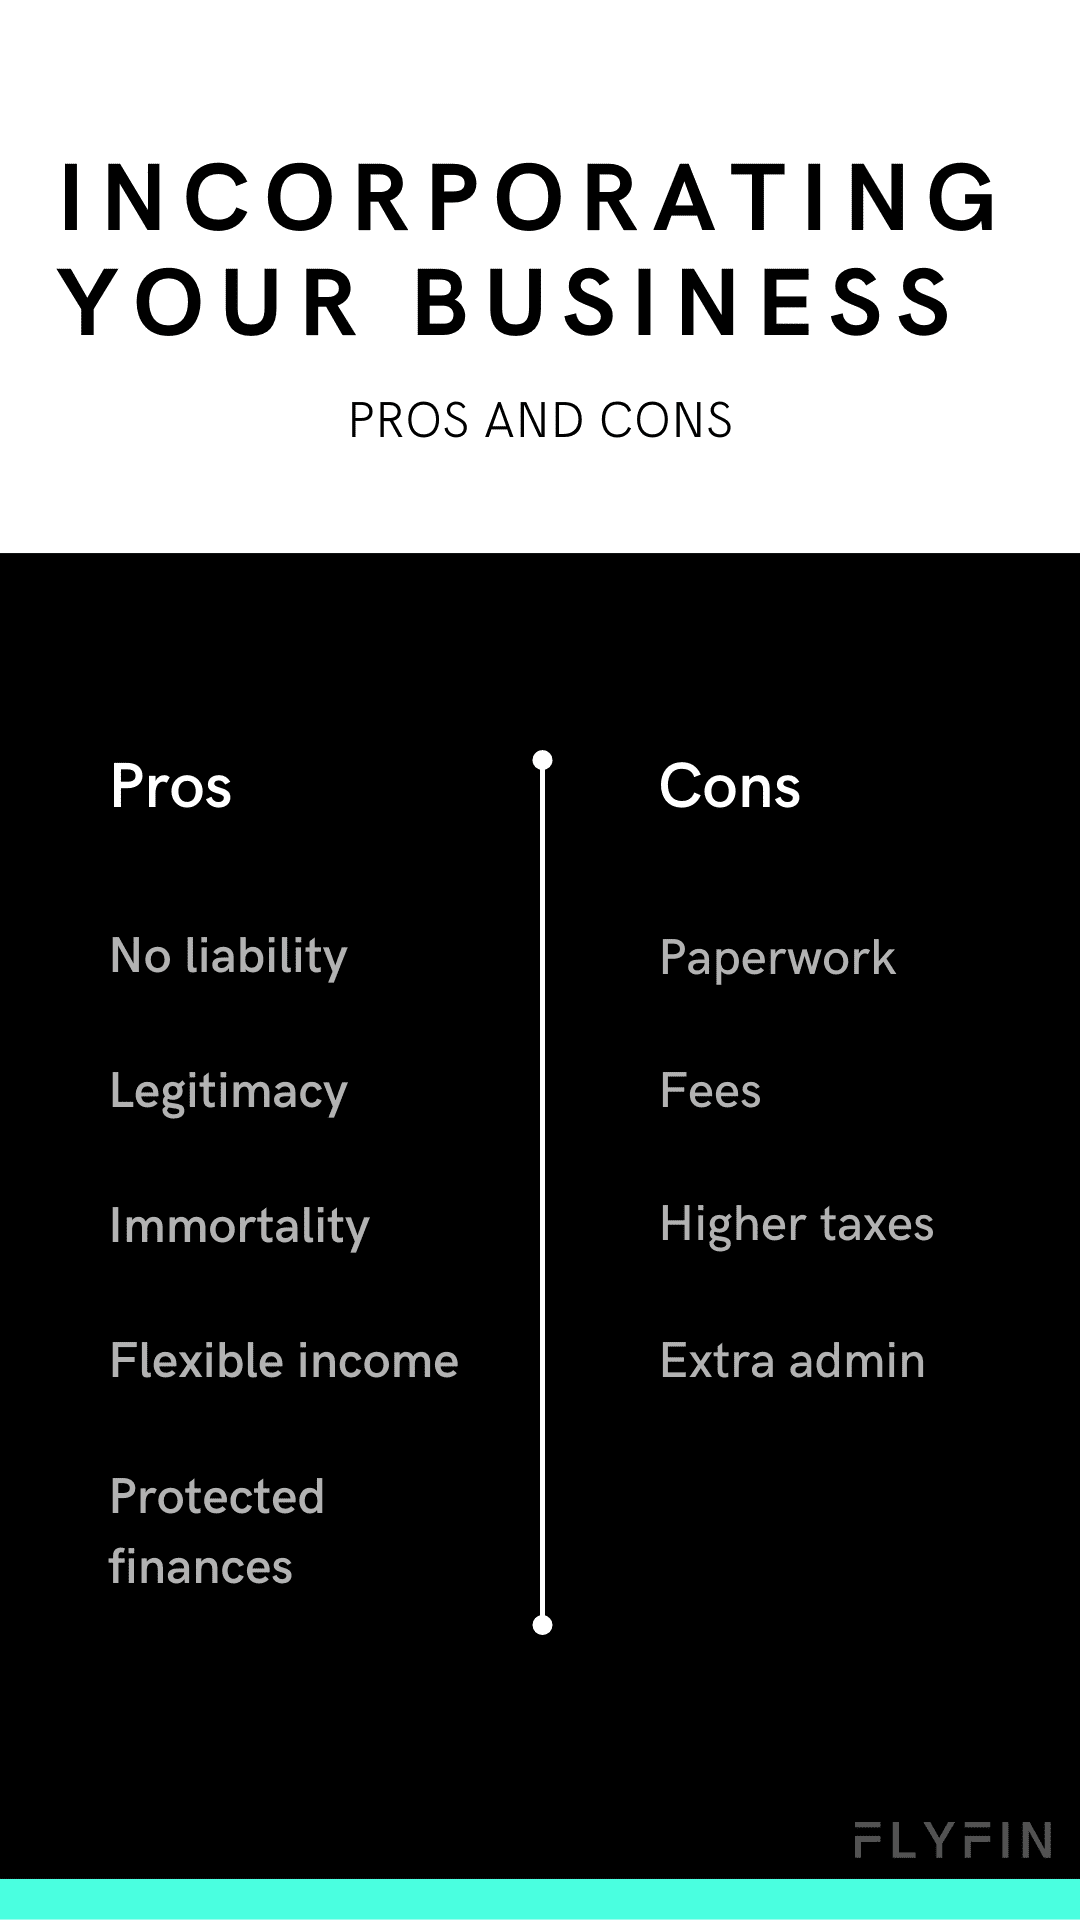 Pros and cons of incorporating